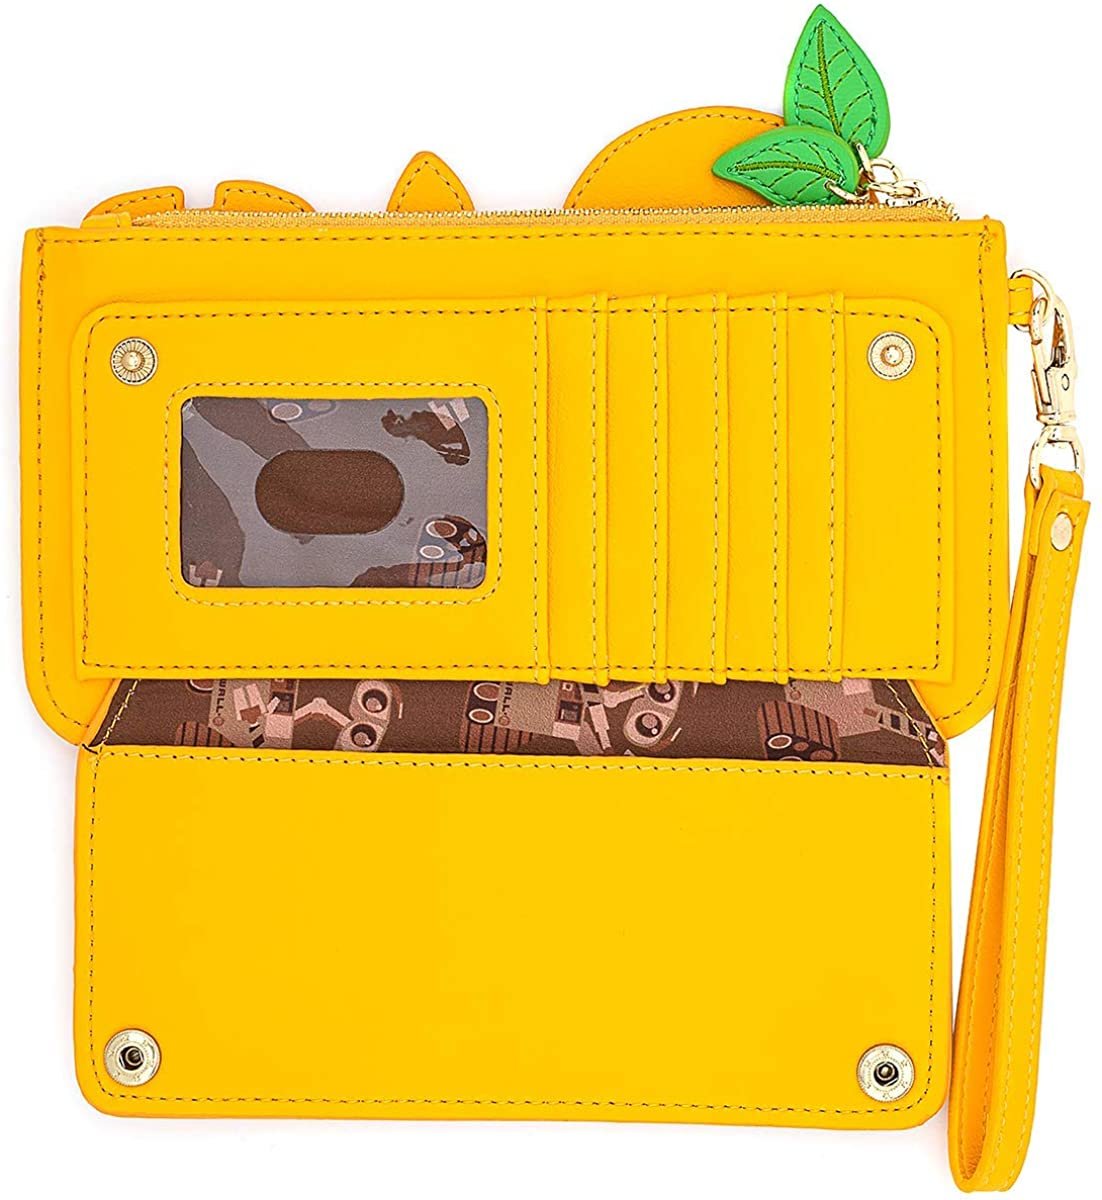 Loungefly Disney Pixar WALL-E and Eve Boot Plant Flap Wallet